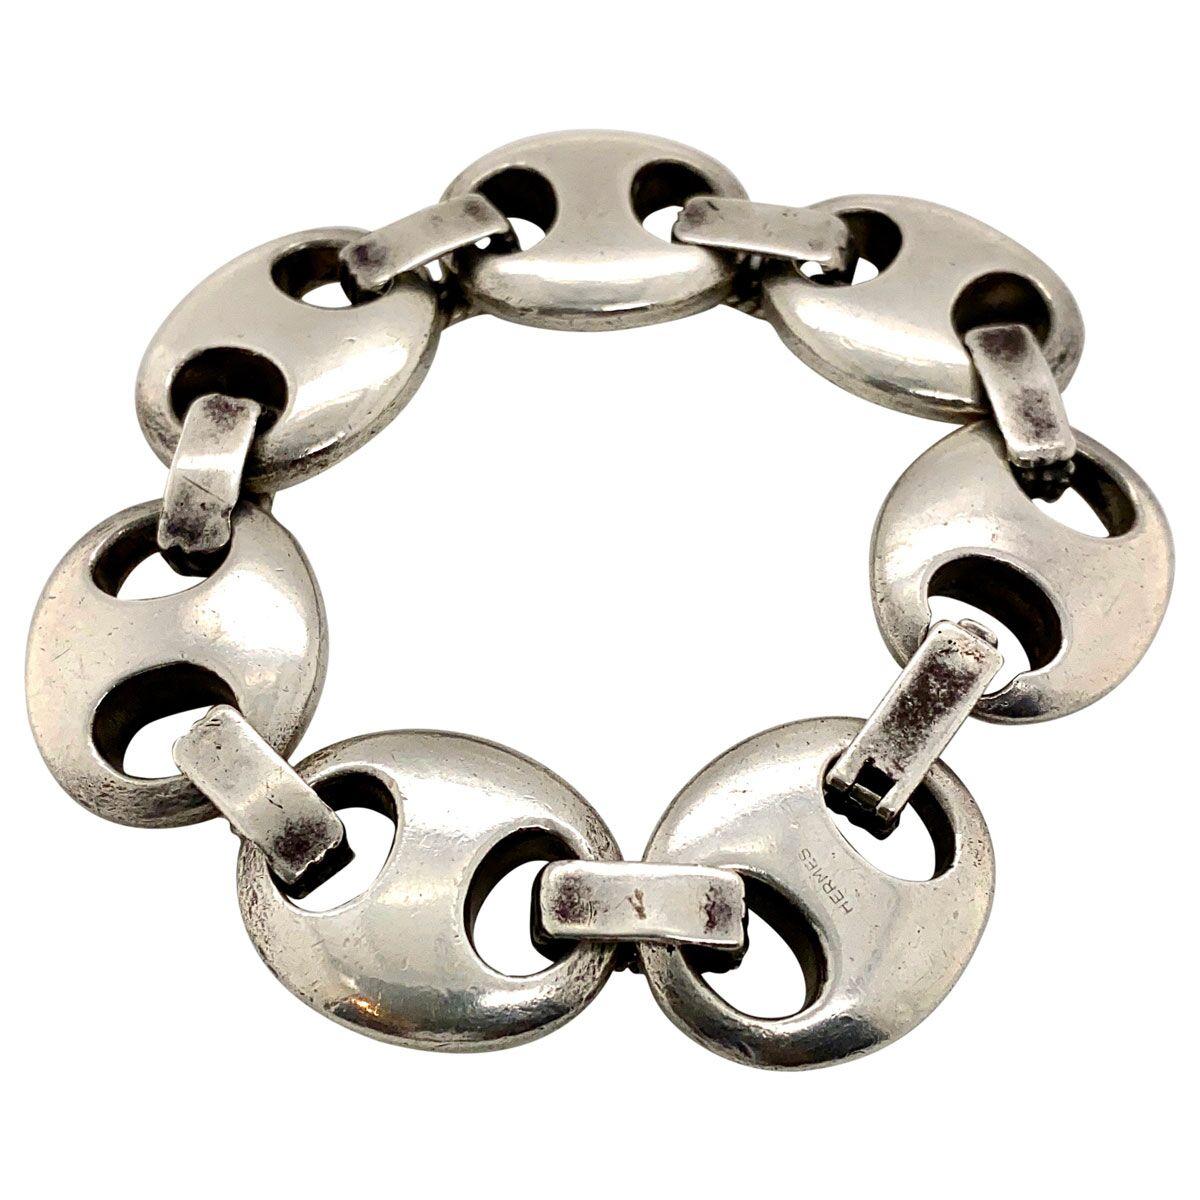 A weighty and substantial piece for the wrist but so chic and stylish. Crafted from 925 Sterling Silver, these nautical style links are so fashionable and sought after. This bracelet features seven heavy sinker style mariner links each with two